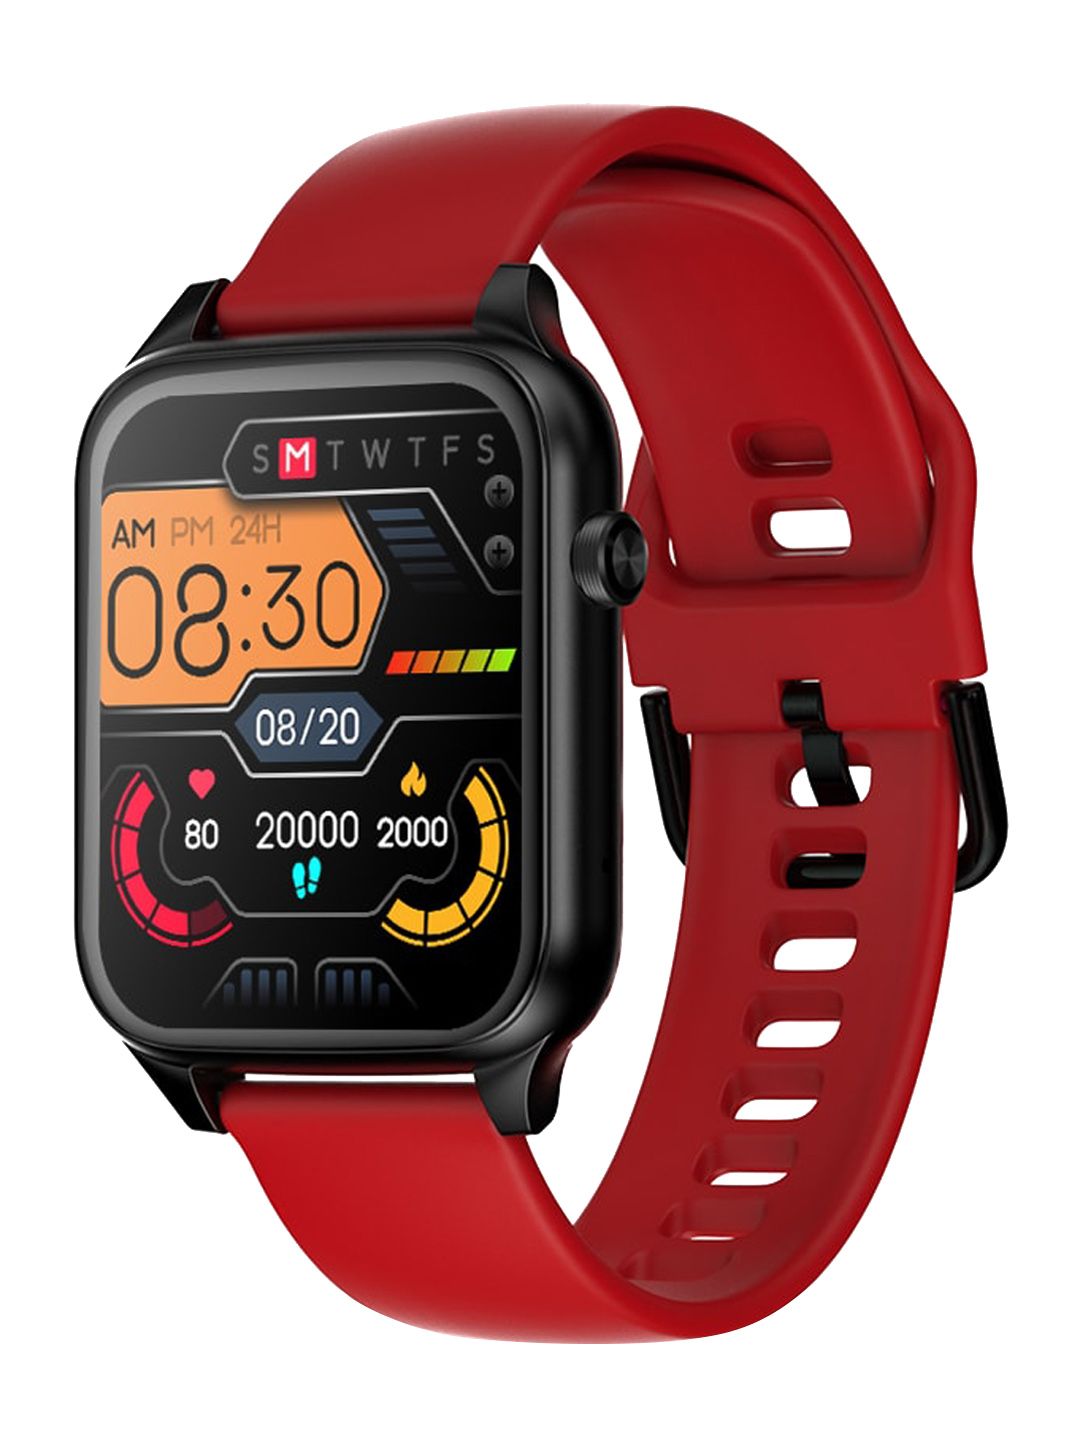 molife Red Solid Sense 500 Pro 1.7 Inch Bluetooth Calling with AI Assistances Smart Watch Price in India